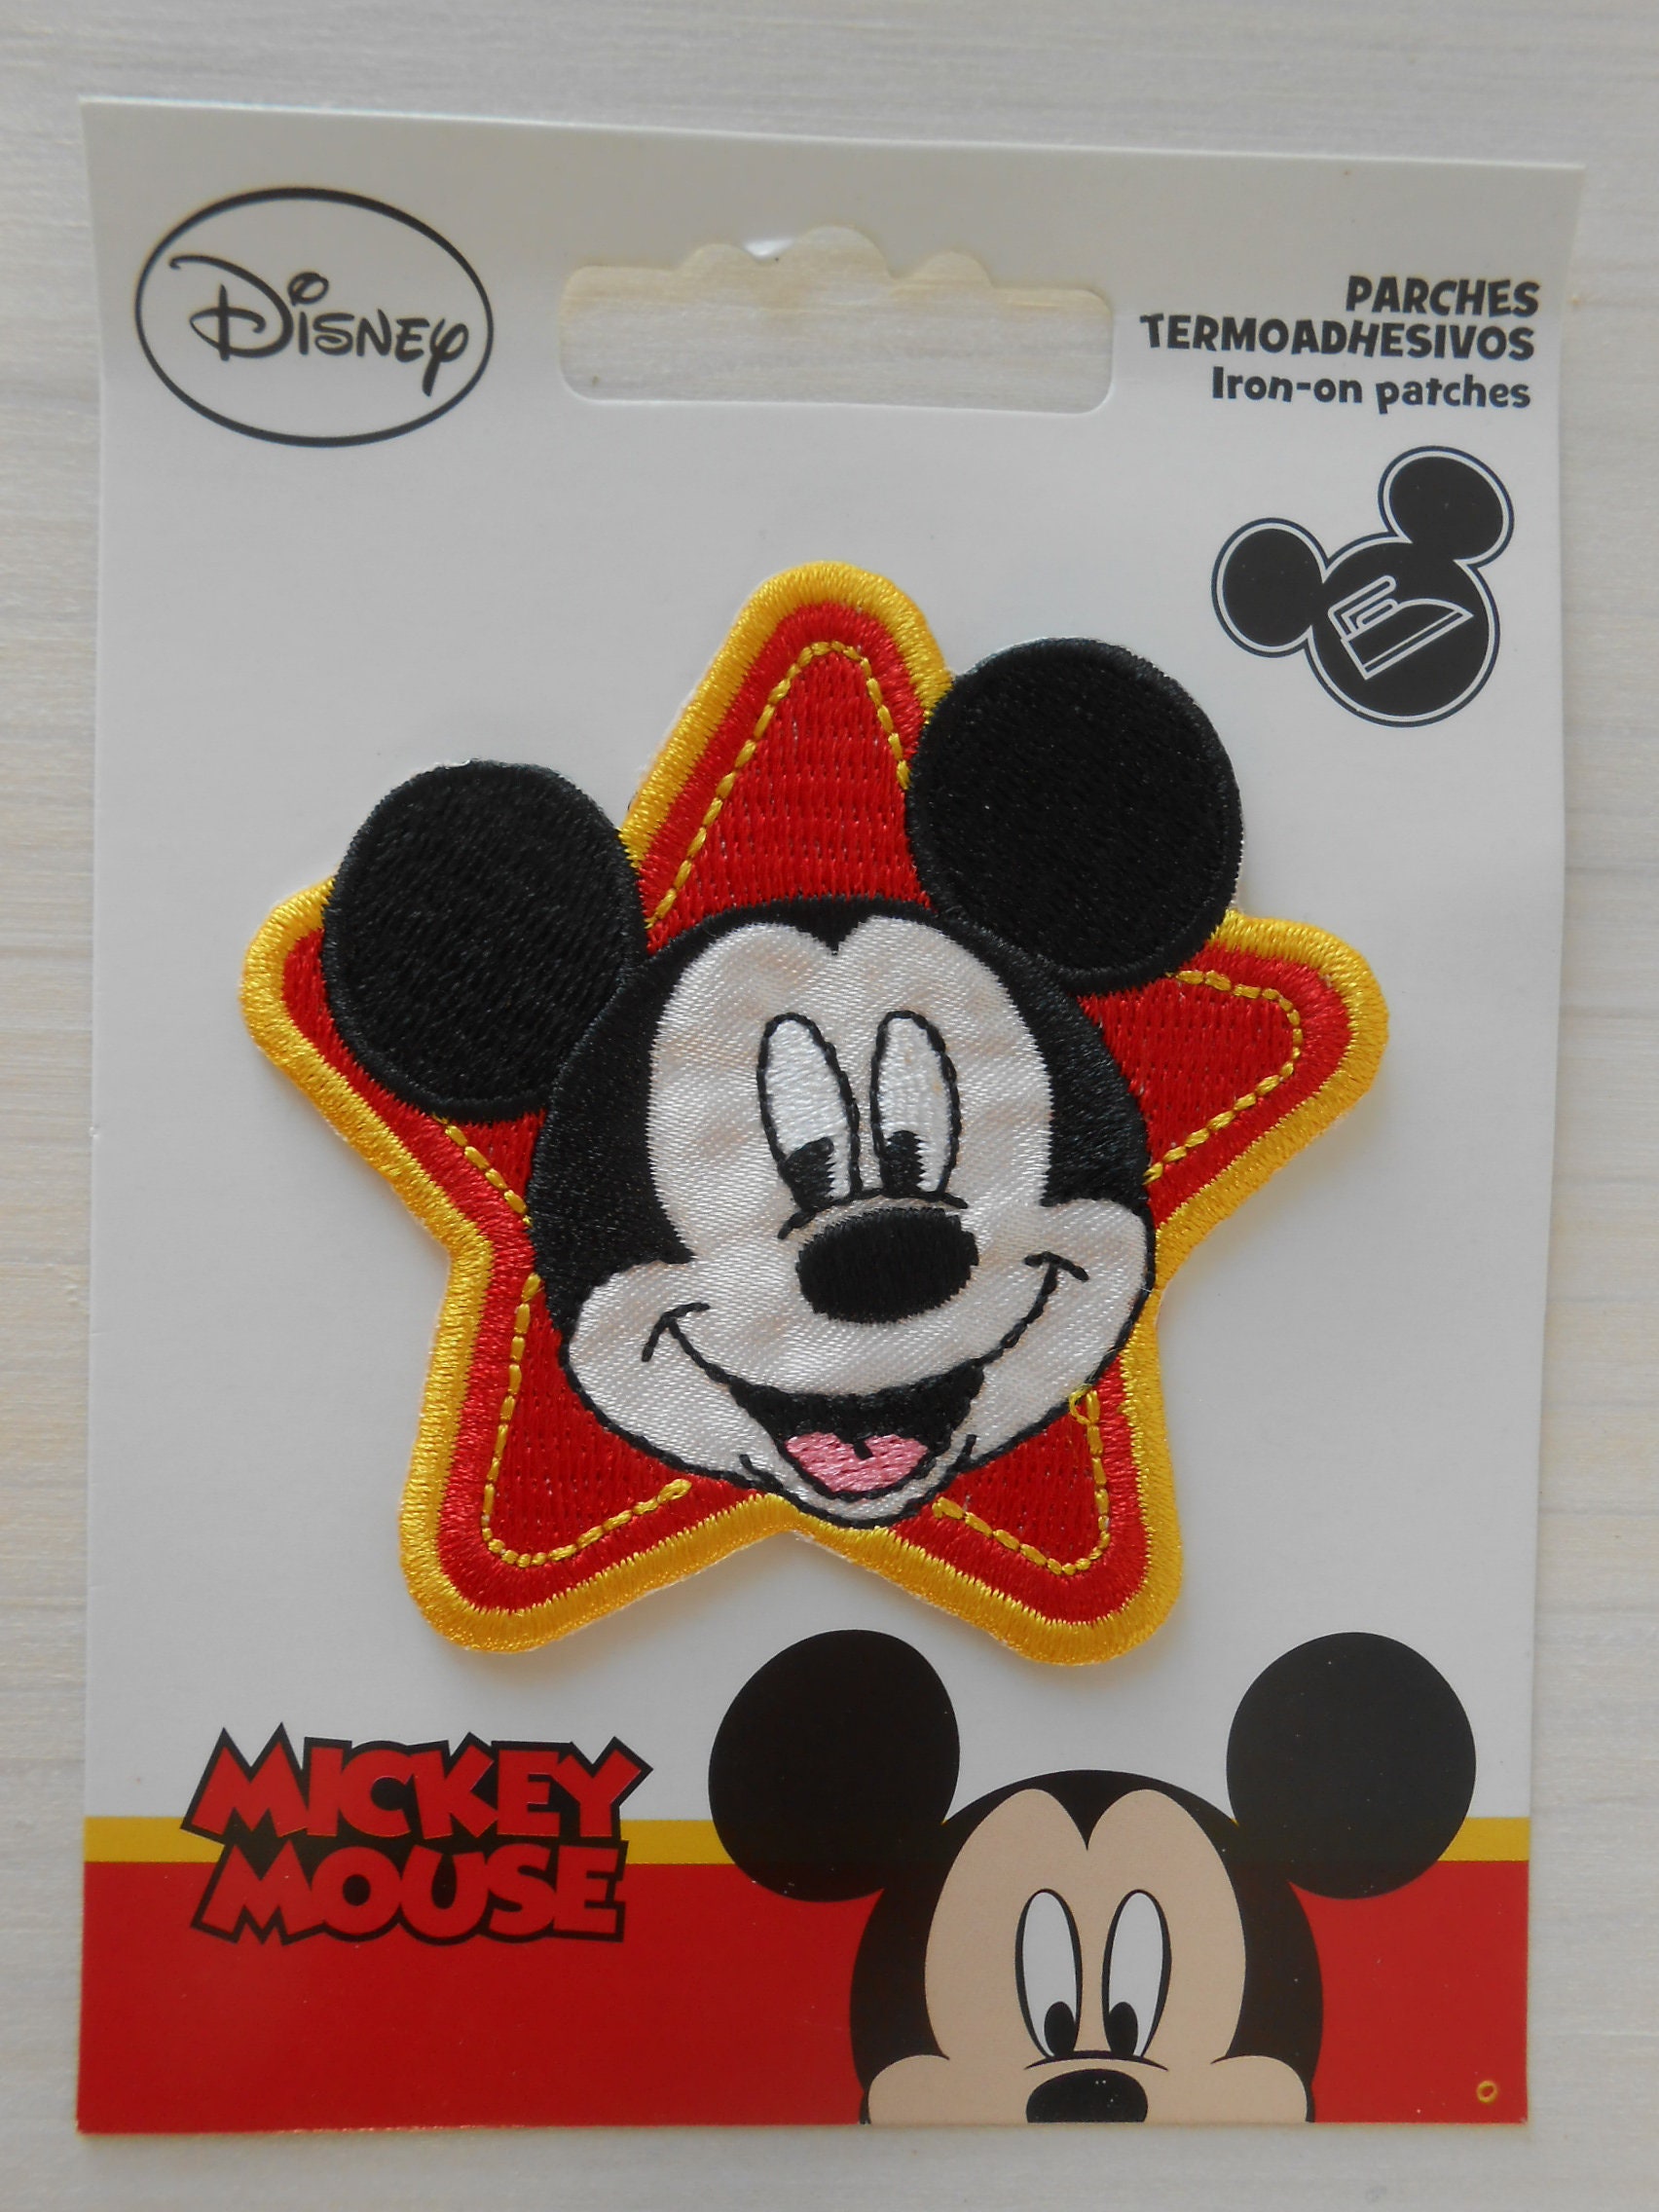 Disney Patch Mickey Mouse Iron on Large Embroidered XL Applique